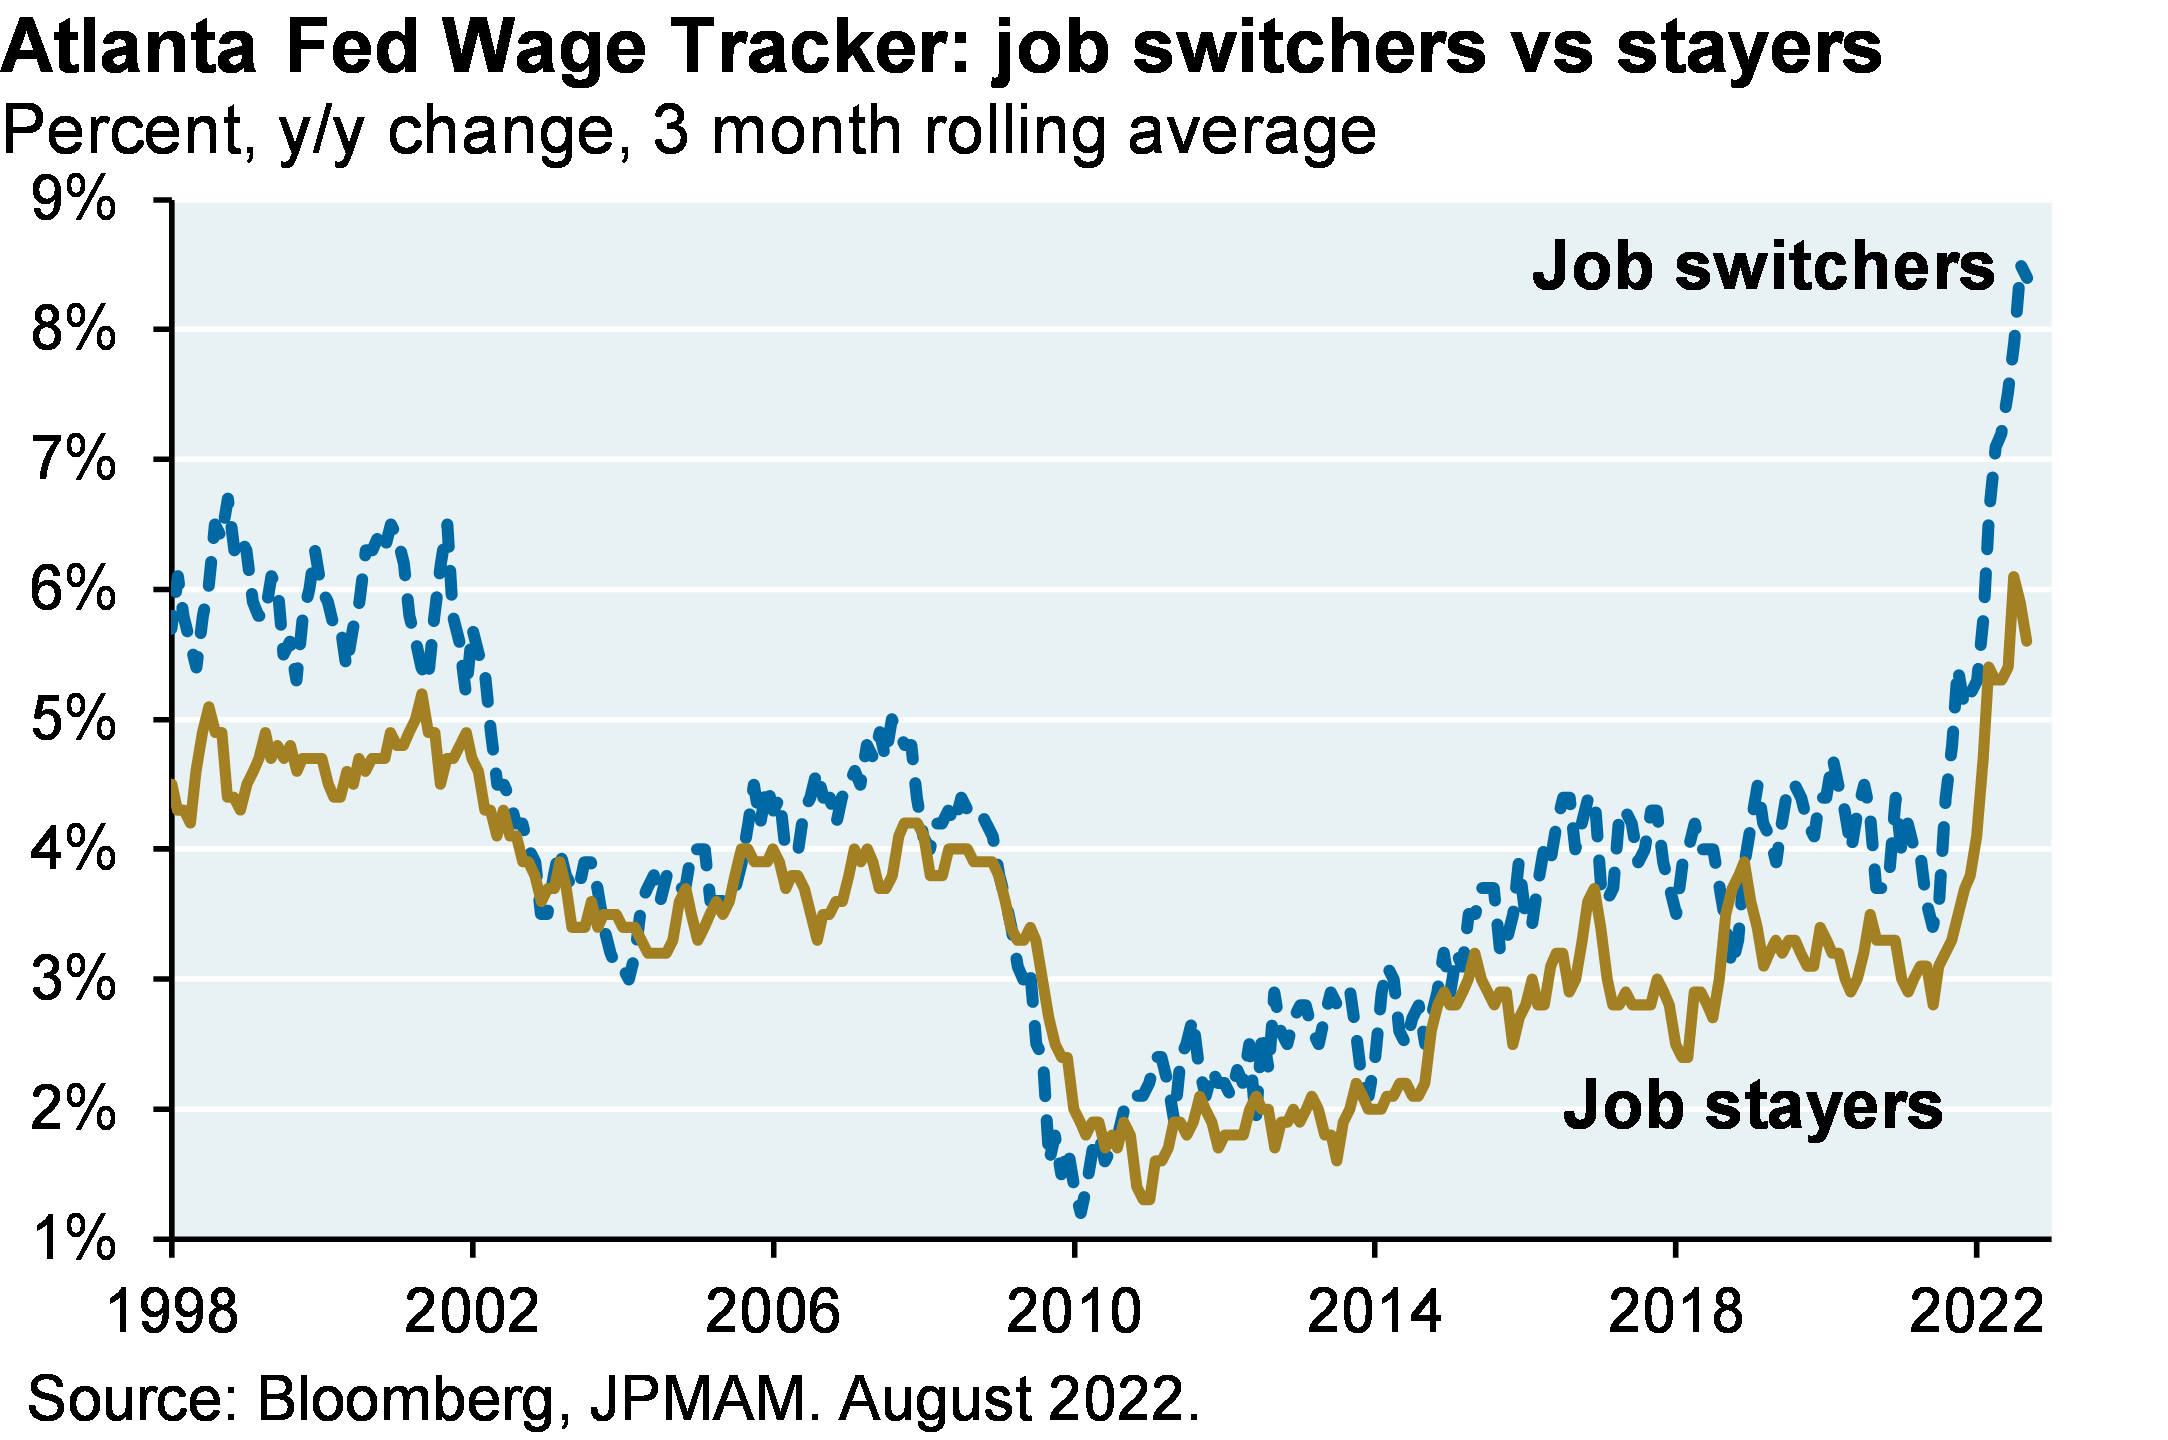 Line chart compares year-over-year wage percent changes in wages for job switchers versus job stayers as a 3 month rolling average from 1998 to now. The comparison shows that job switchers are earning a high premium relative to job stayers today.